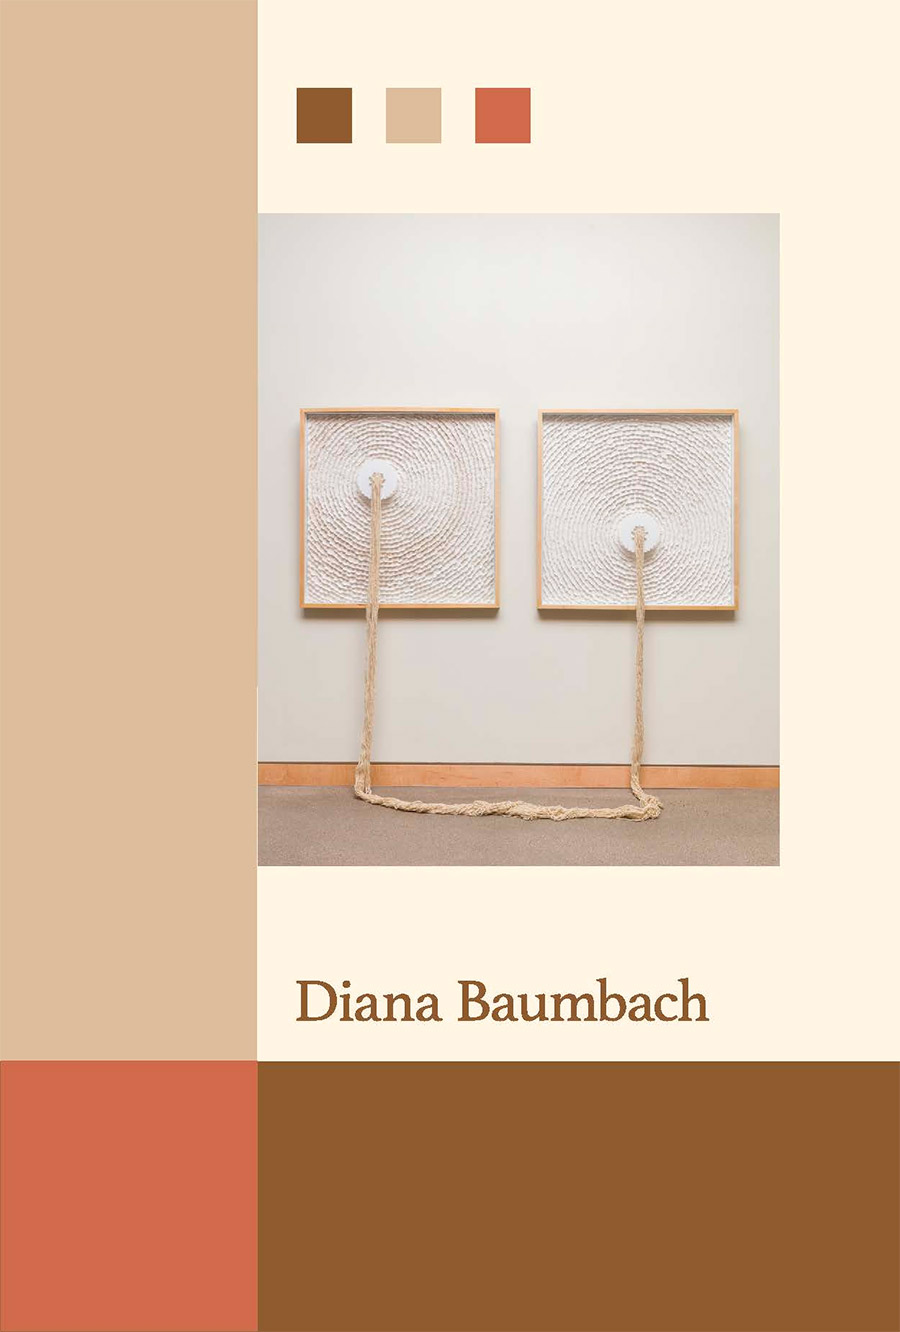 Postcard For Diana Baumbach's Exhibition 